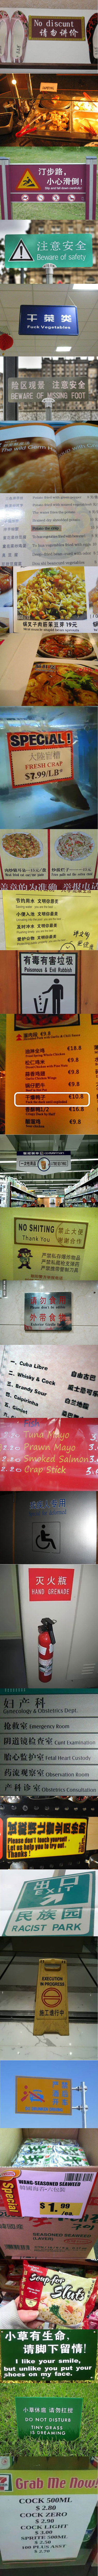 Meanwhile in China...